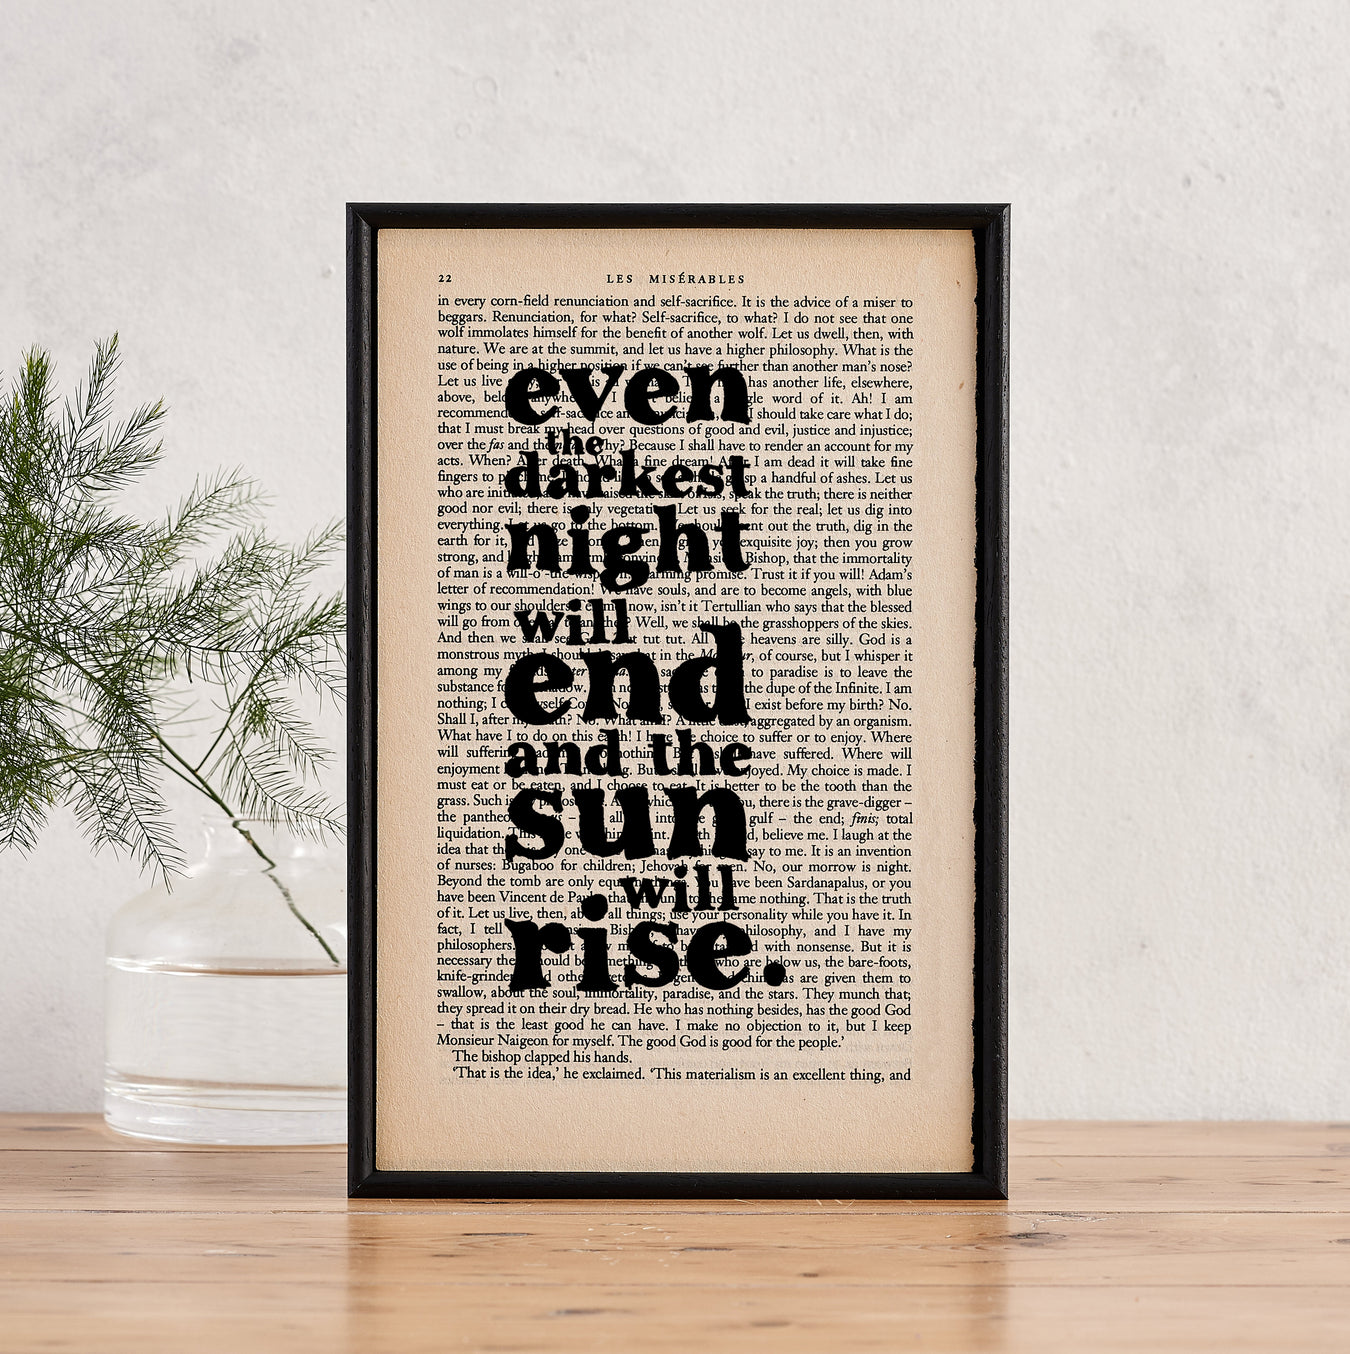 Les Miserables 'even the darkest night will end and the sun will rise' framed book page print